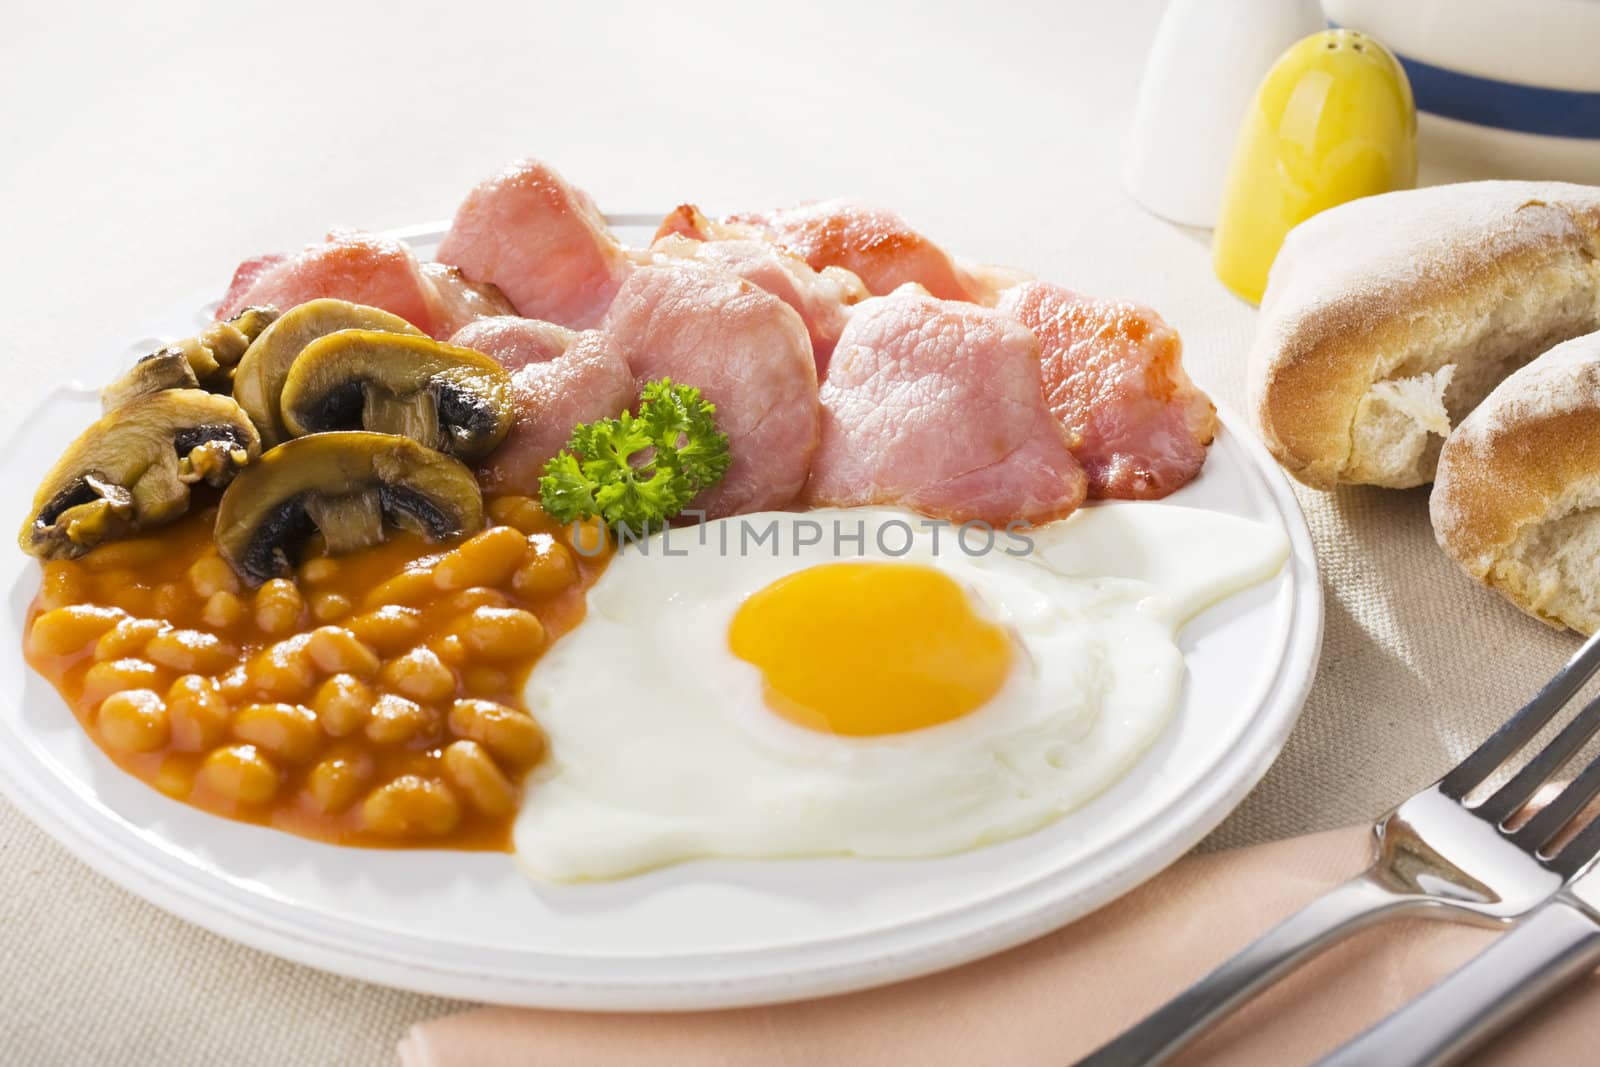 English breakfast of bacon, egg, baked beans and mushrooms.